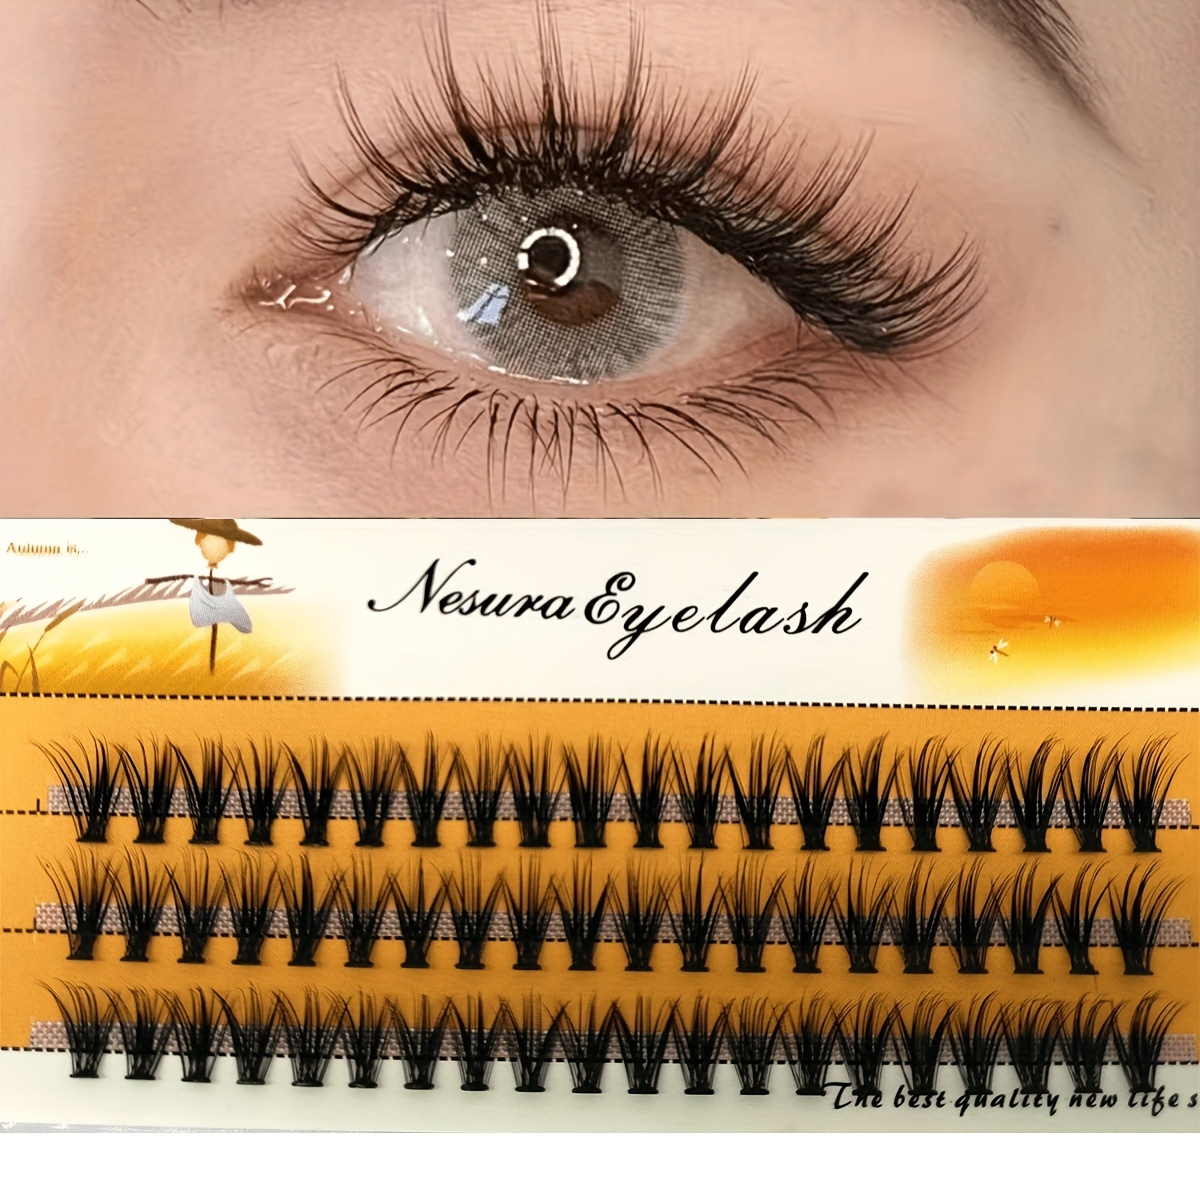 

60 Clusters 3 Rows C Natural Soft Bunch Eyelashes, 11mm Length, Suitable For Daily Use And Special Occasions Like Parties, Cosplay, And Role Play